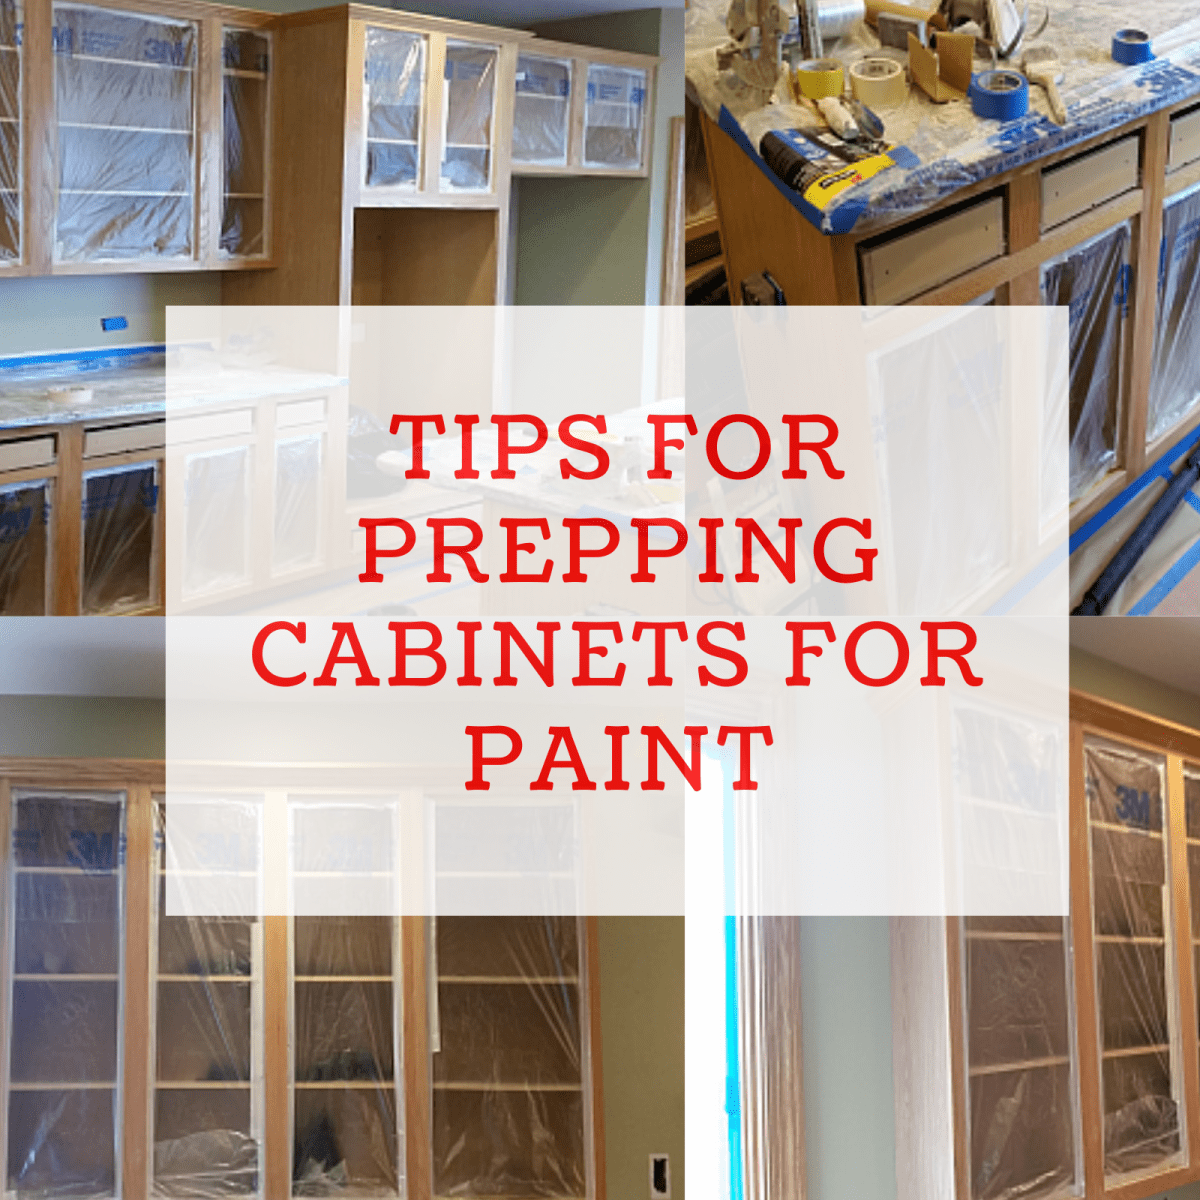 Tips For Prepping Cabinets Paint, How To Remove Grease From Cabinets Before Painting